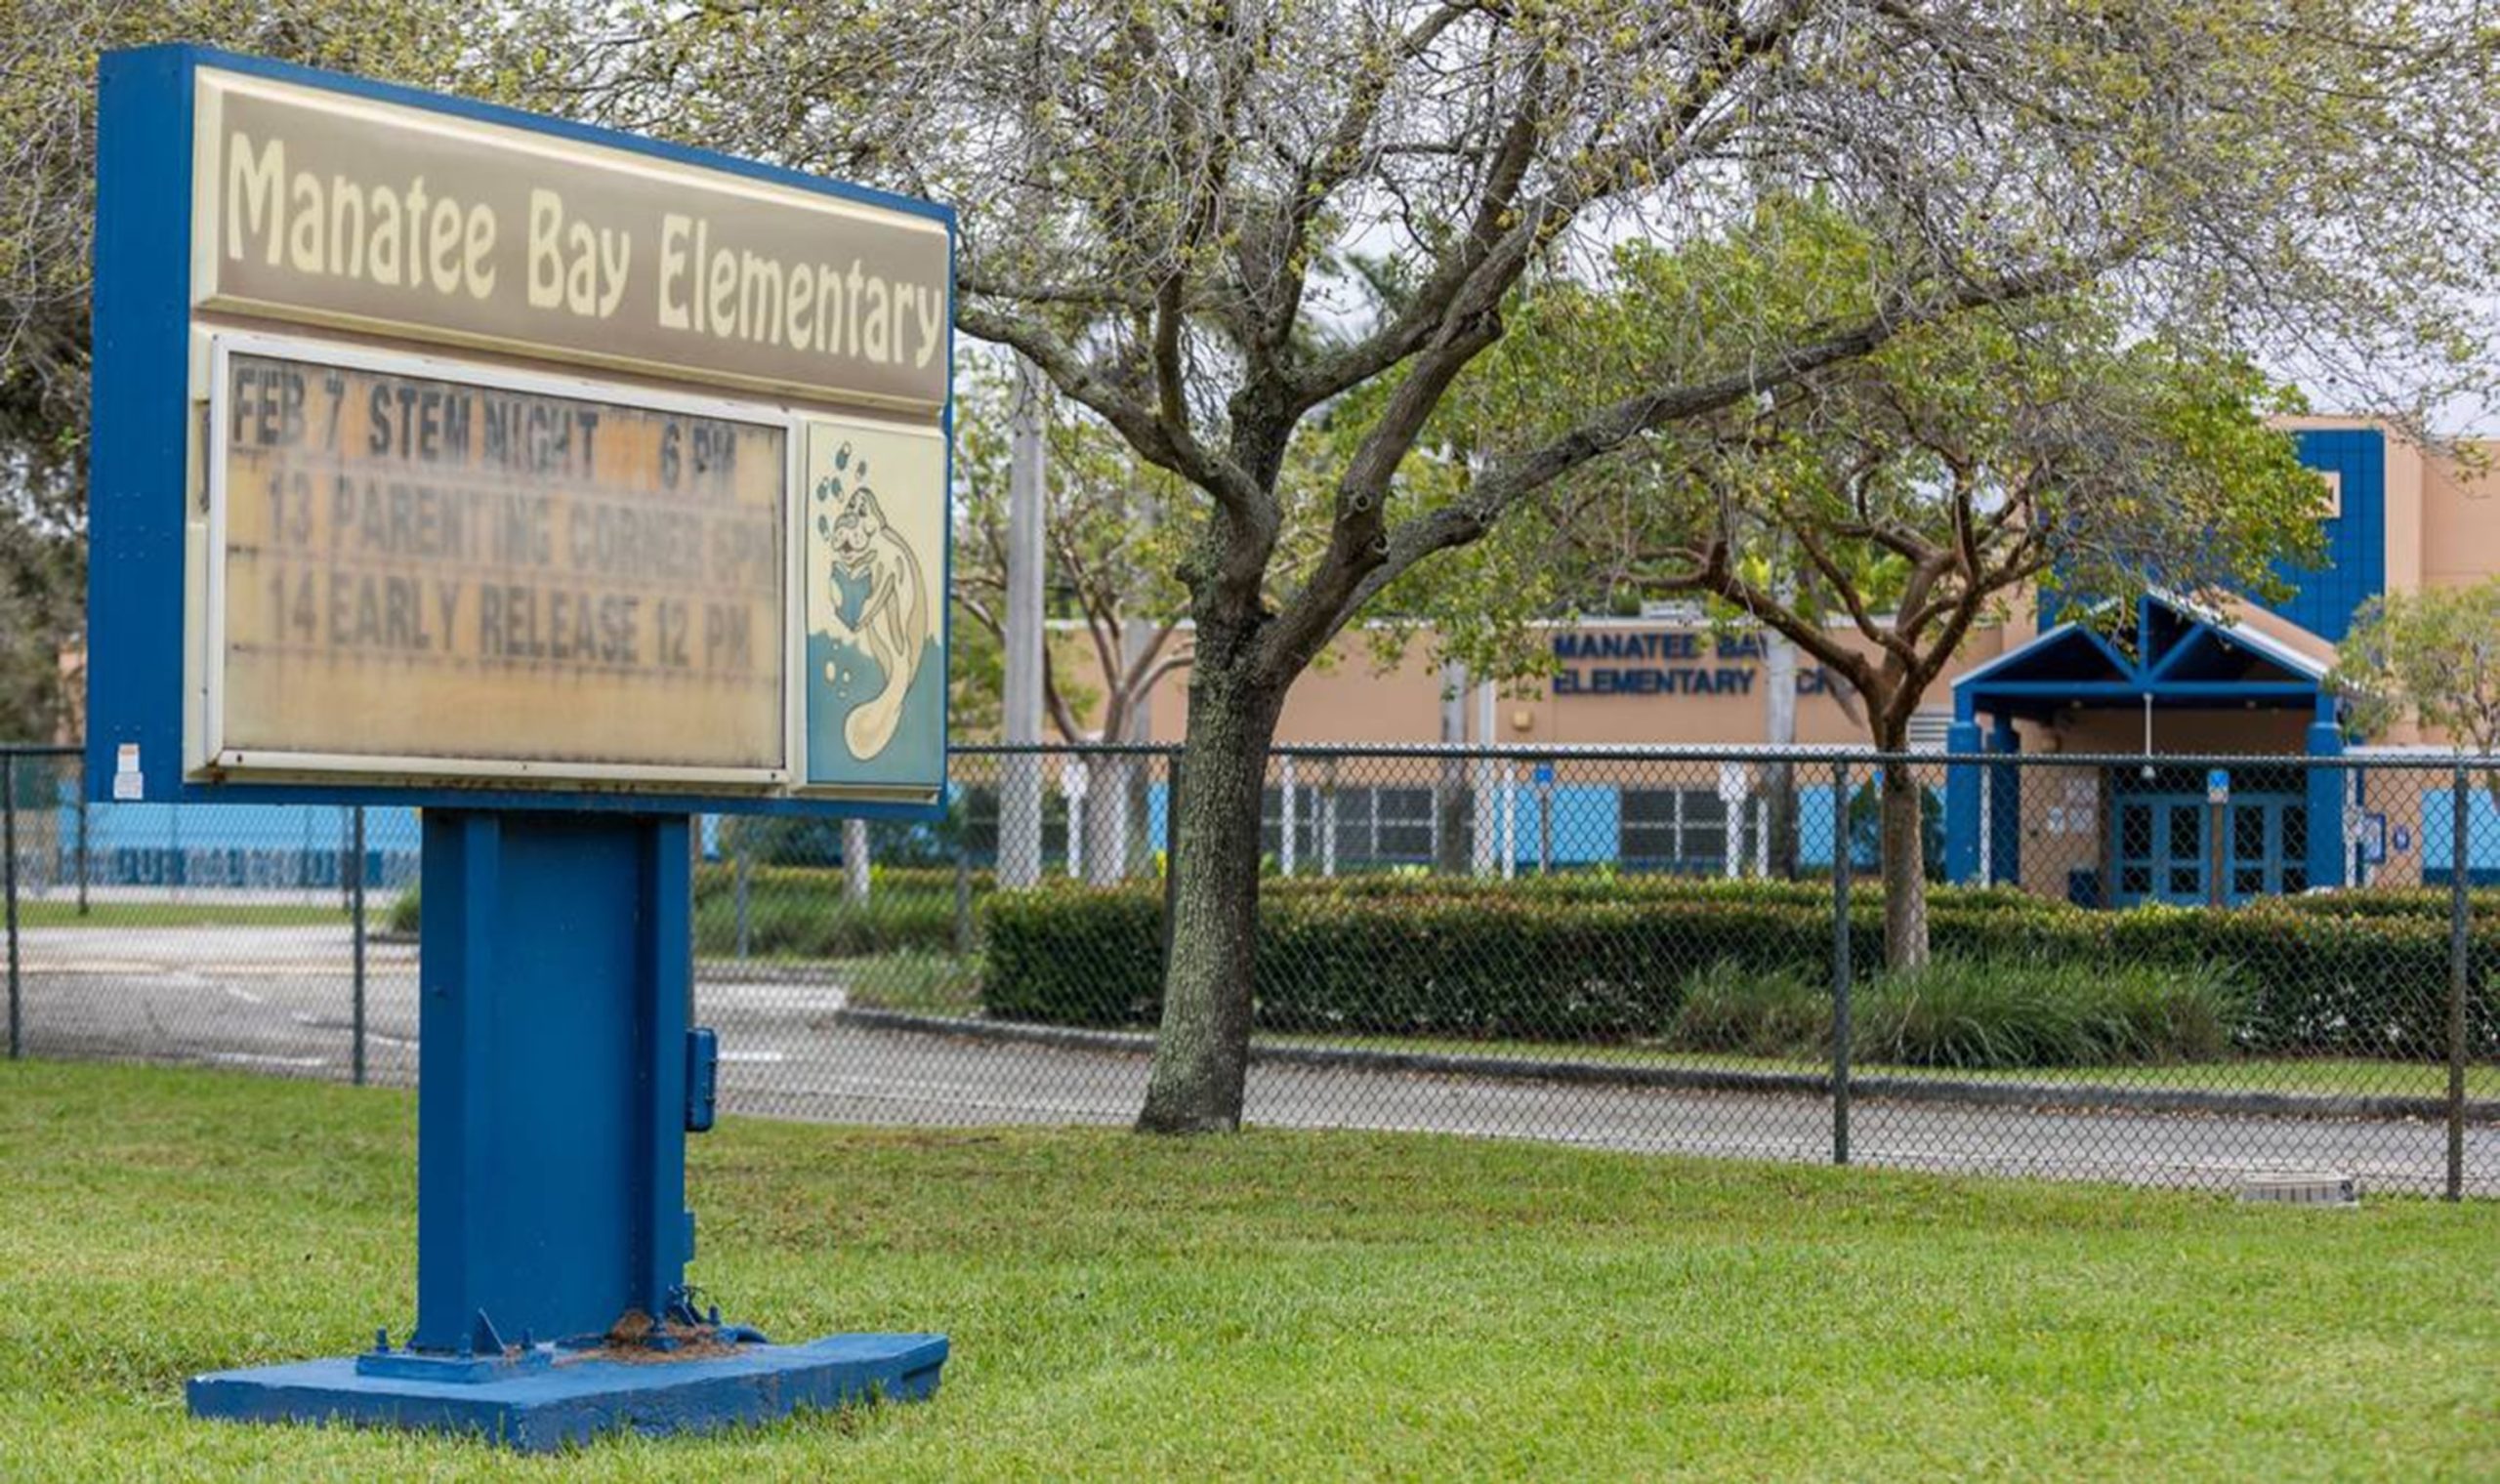 Florida Elementary School Outbreak: 7th Case of Measles Confirmed